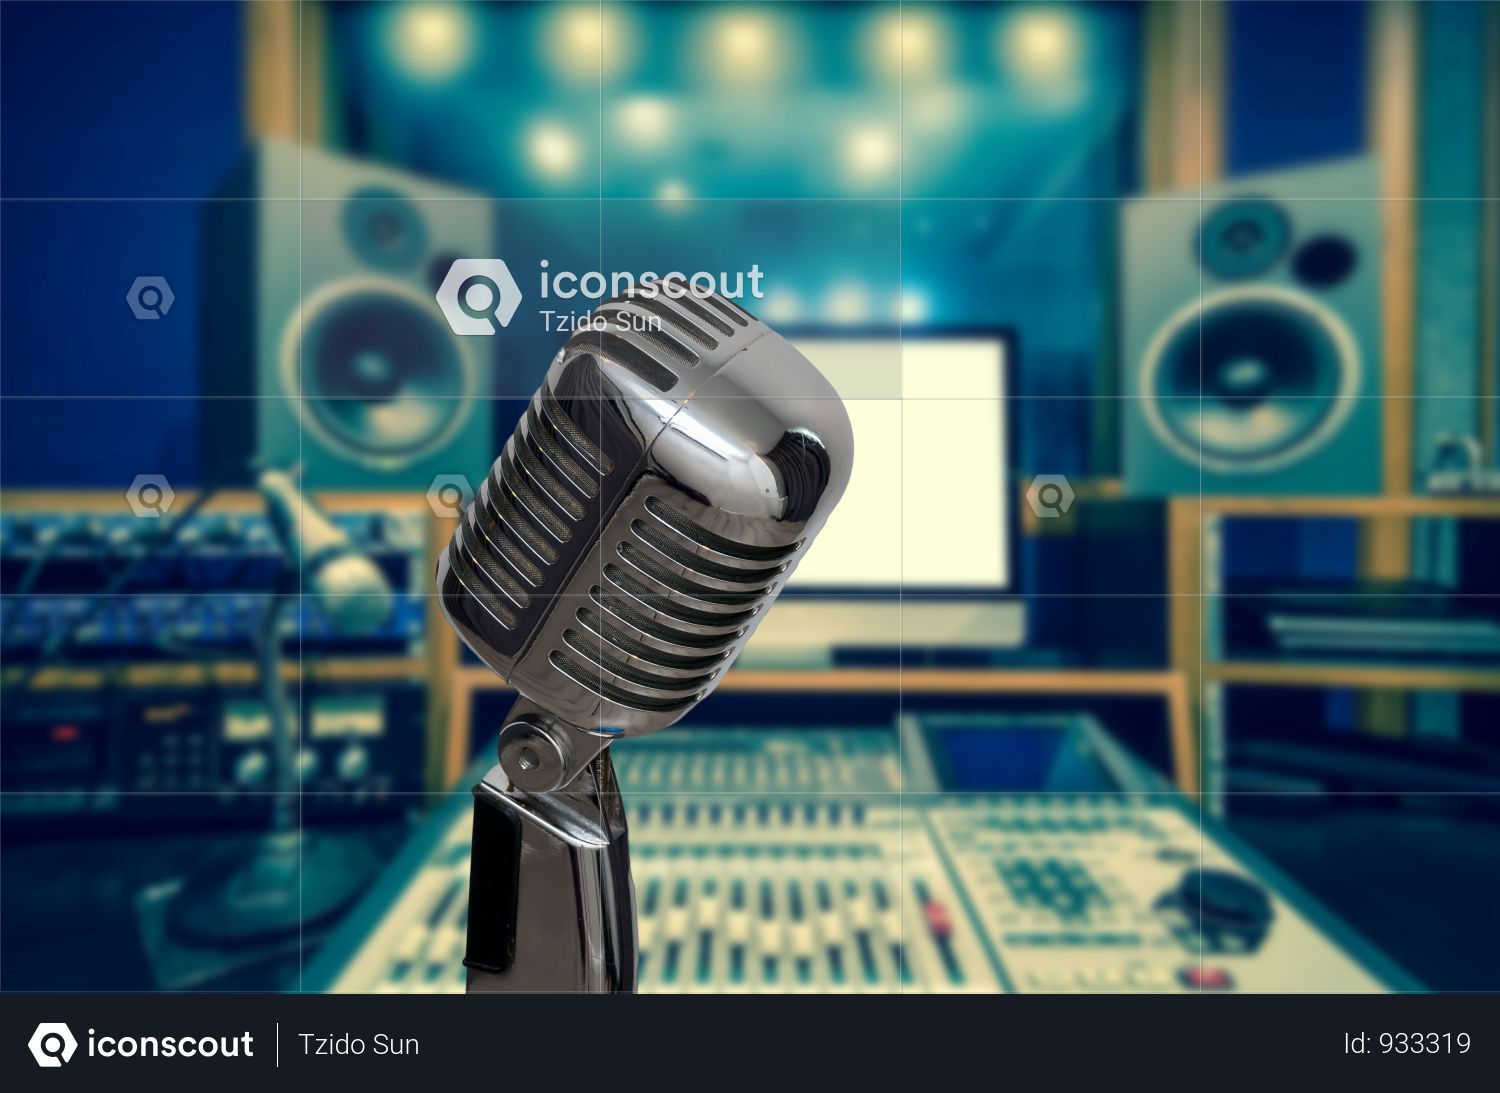 Premium Retro Microphone Over The Photo Blurred Of Music Studio Band Background With Music Instrument Photo Download In Png Jpg Format